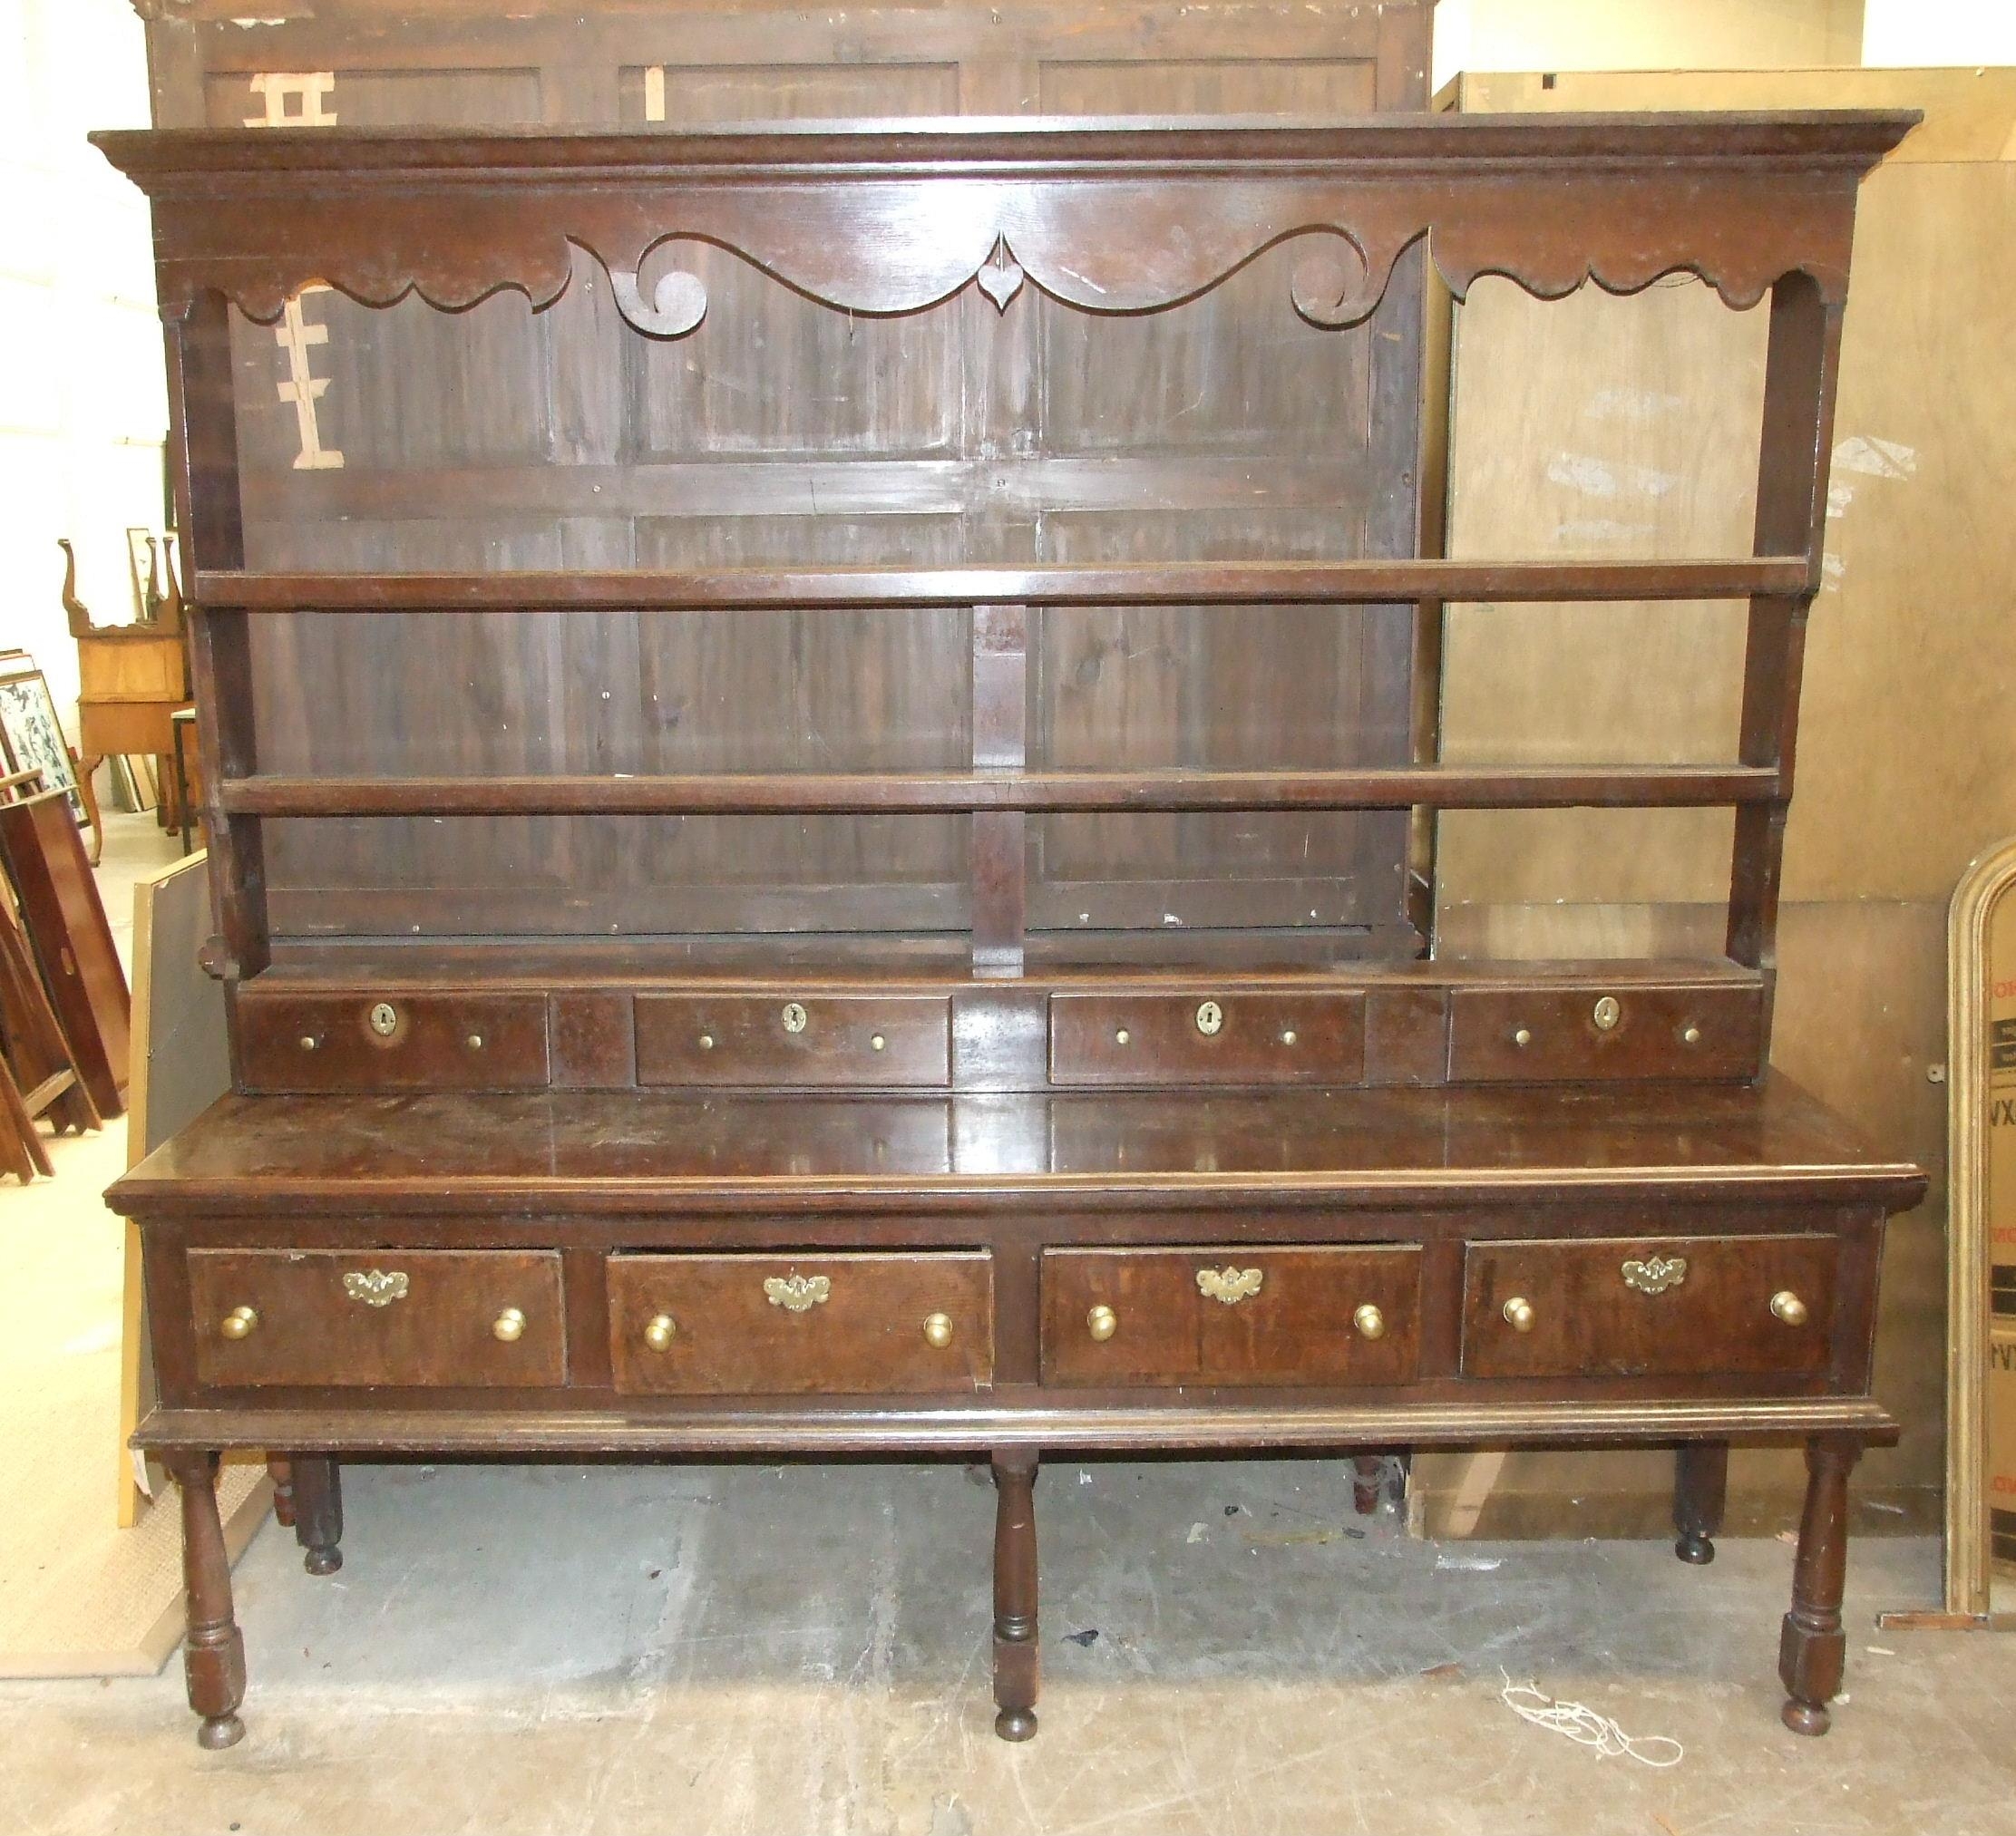 An 18th century oak dresser, the plate rack with cornice, shaped apron, three shelves and three